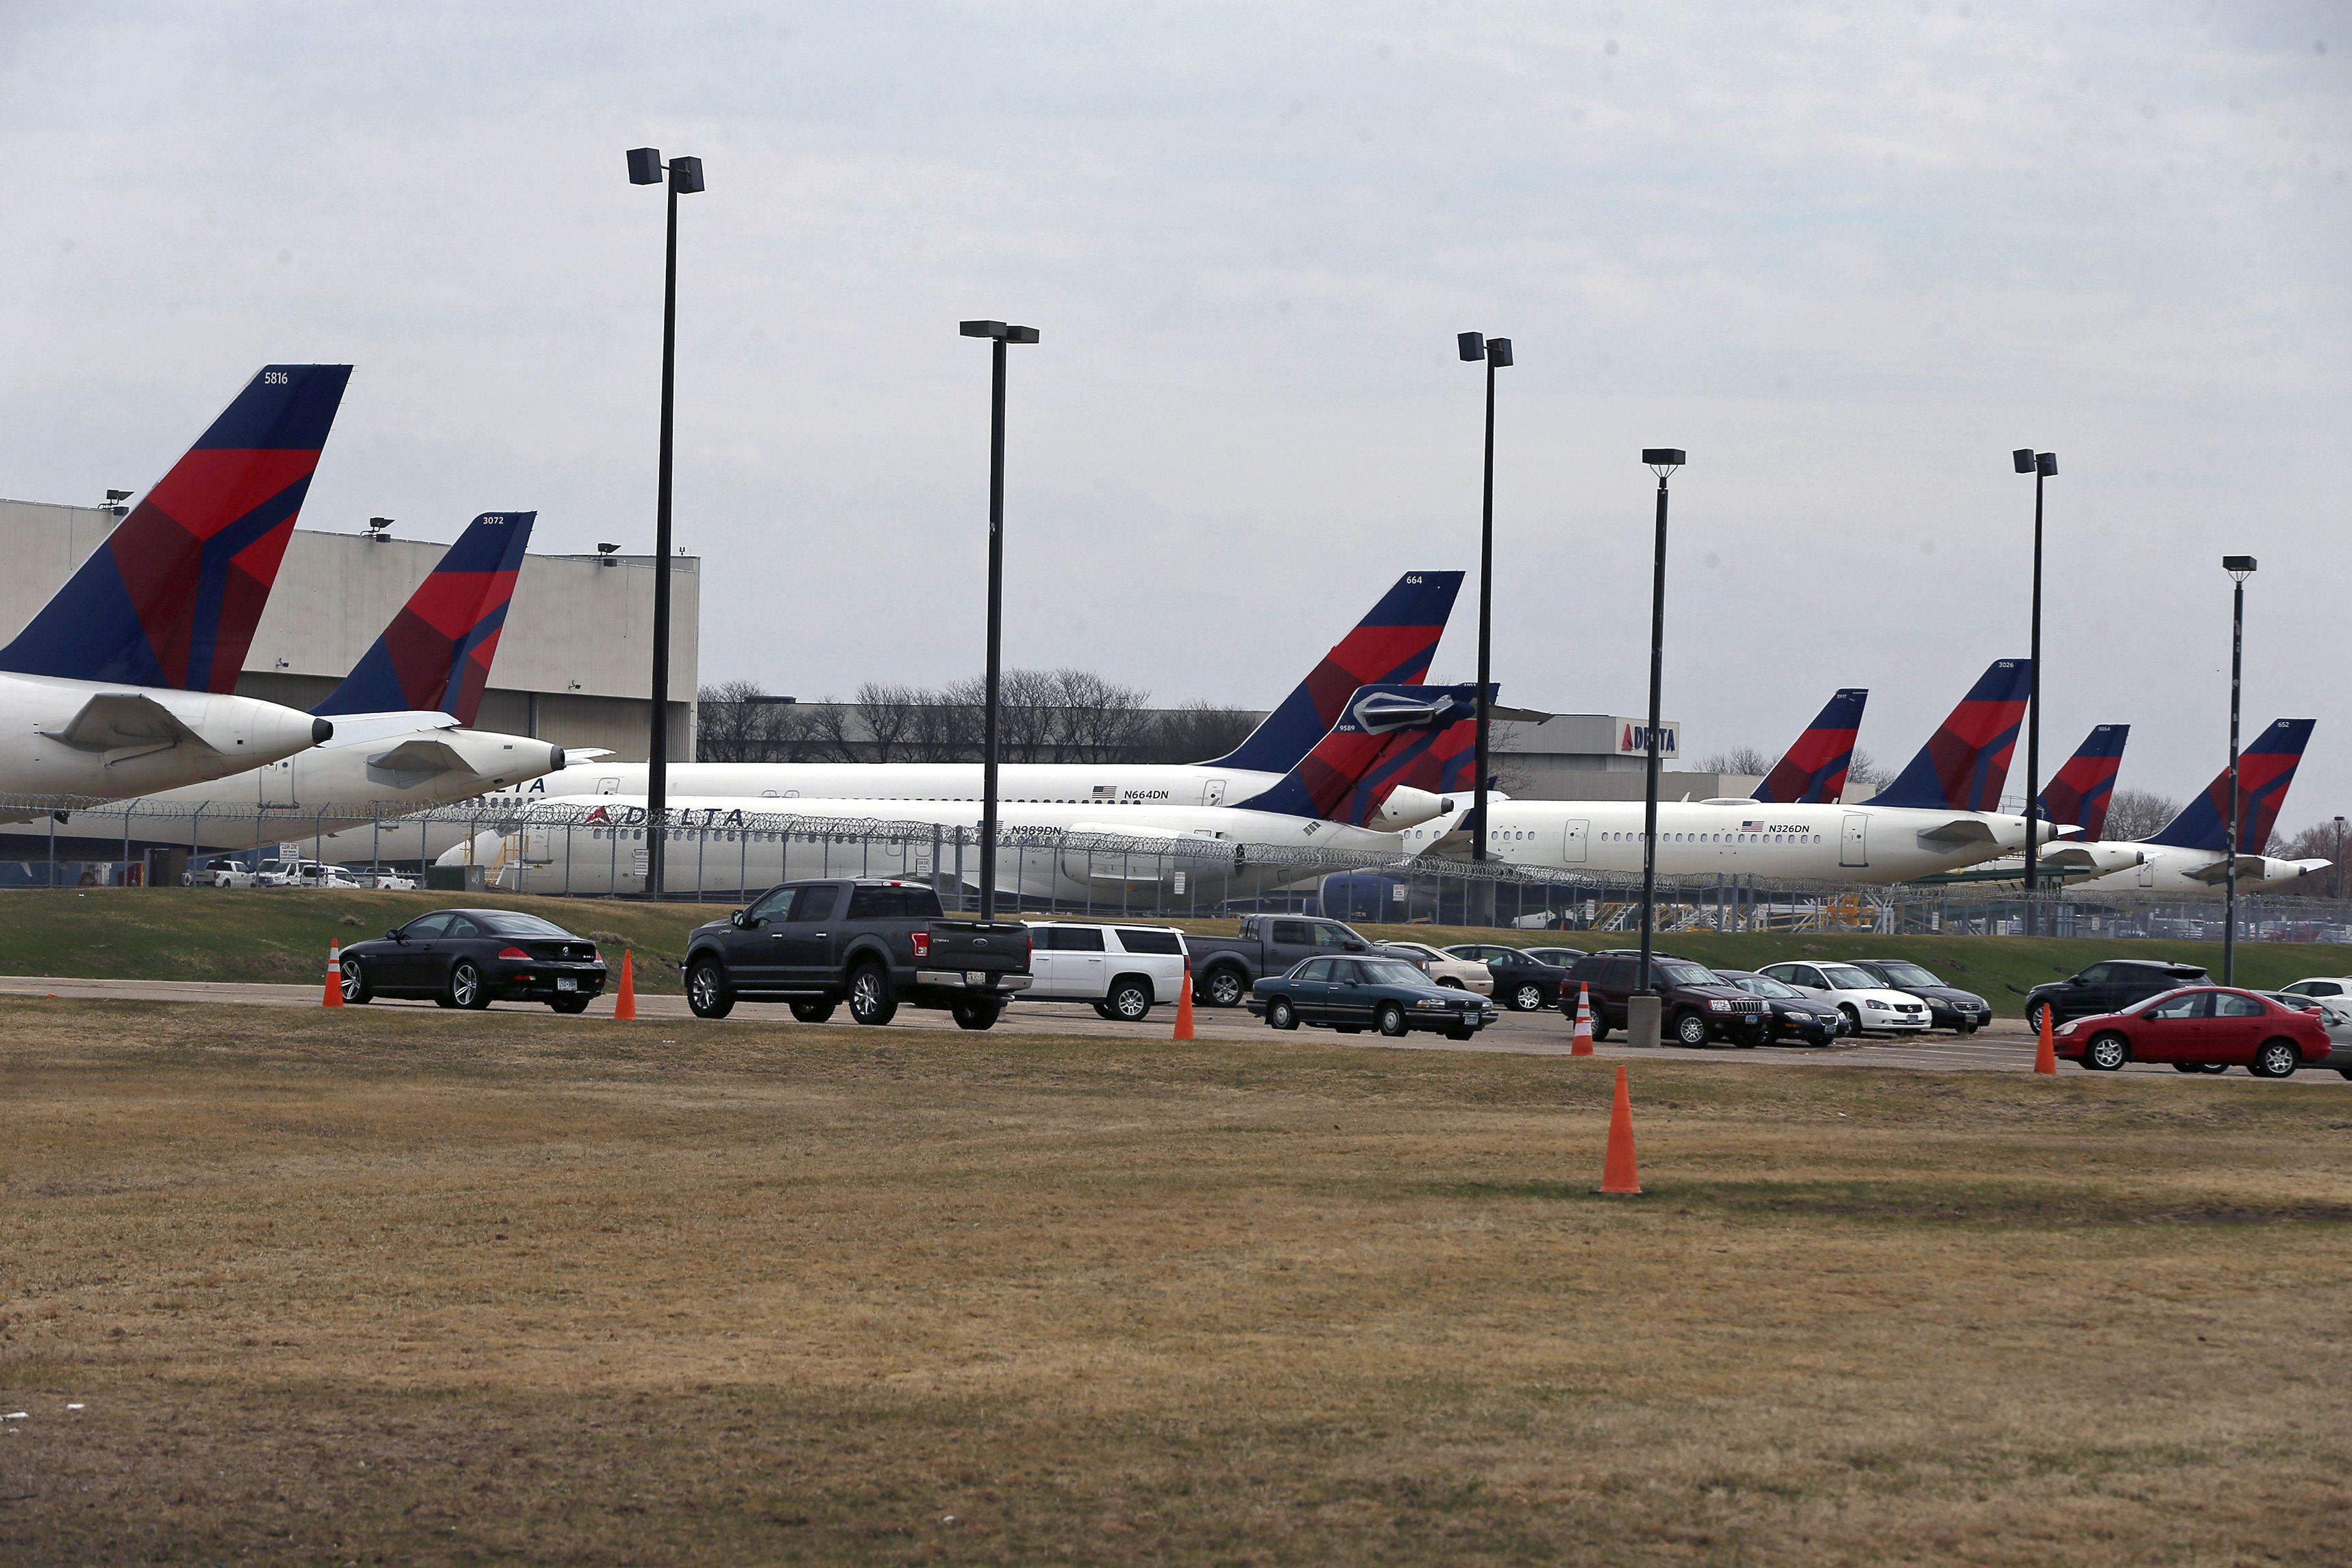 Delta Air Lines planes sit idle at a hangar at Minneapolis-St. Paul International Airport, Thursday, April 2, 2020, as the coronavirus continues to spread. (AP Photo/Jim Mone)